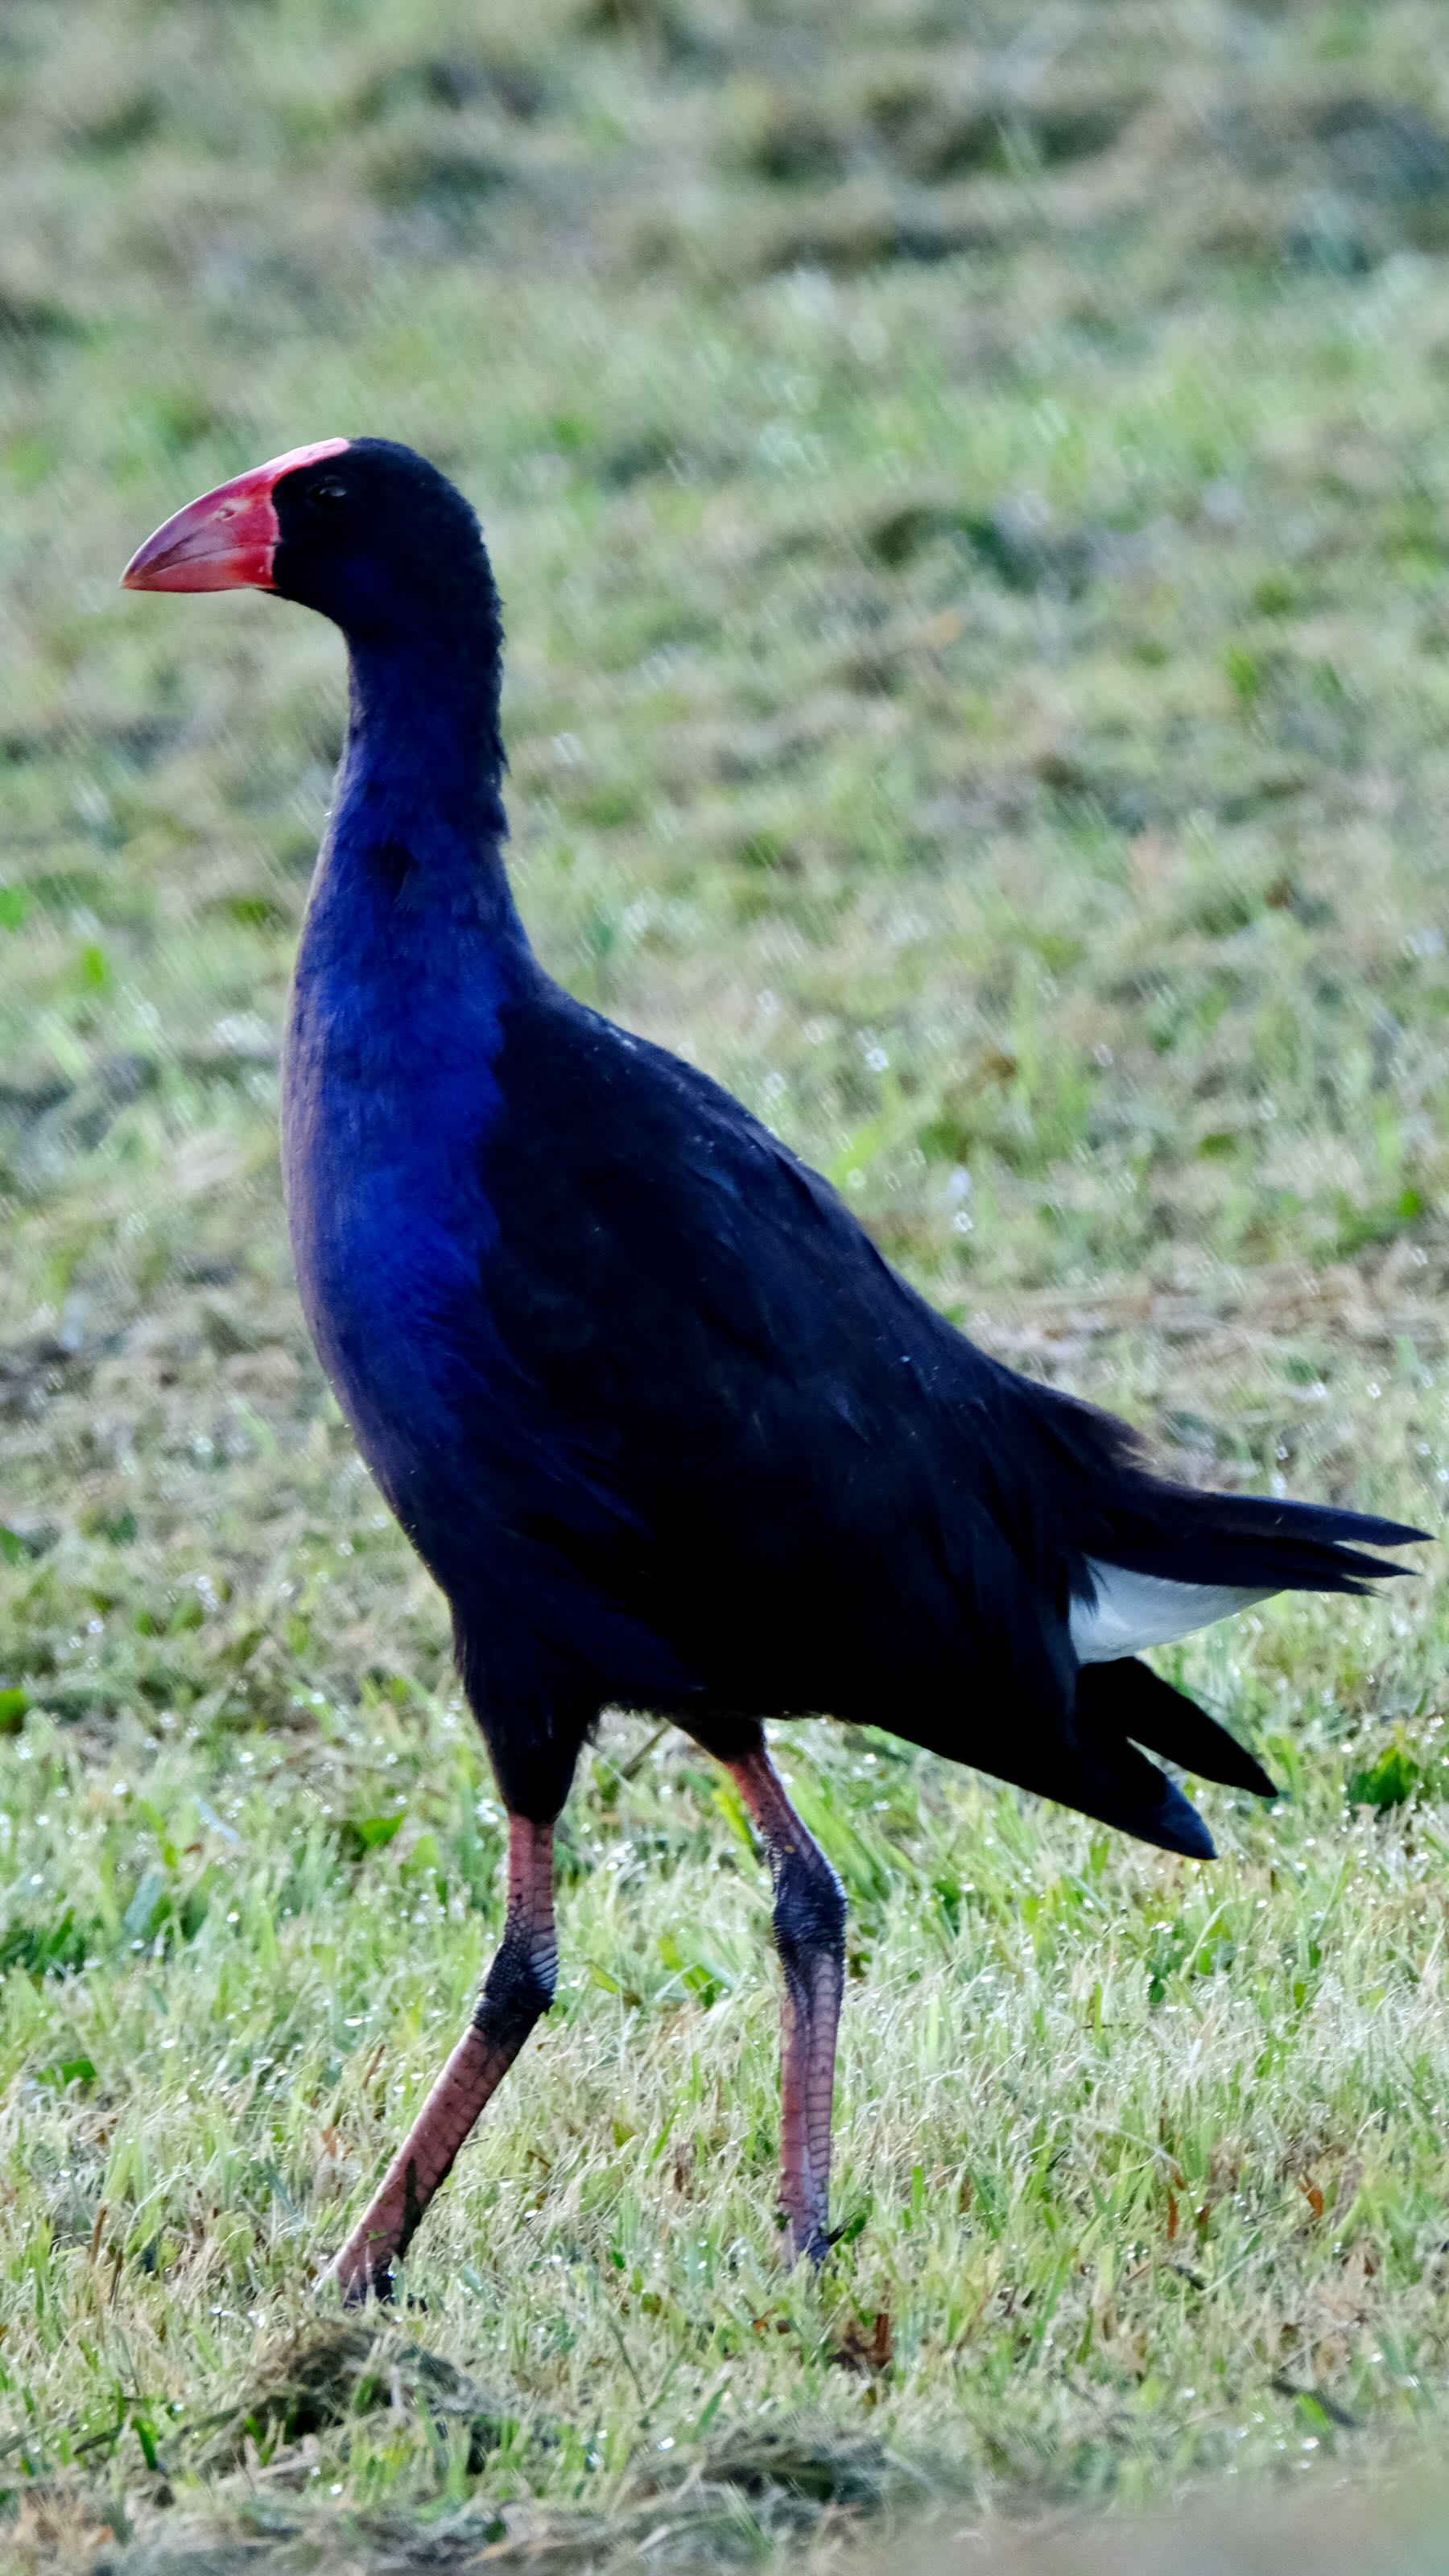 Large bird with vibrant blue body, black wings and red frontal shiels standing on grass. 